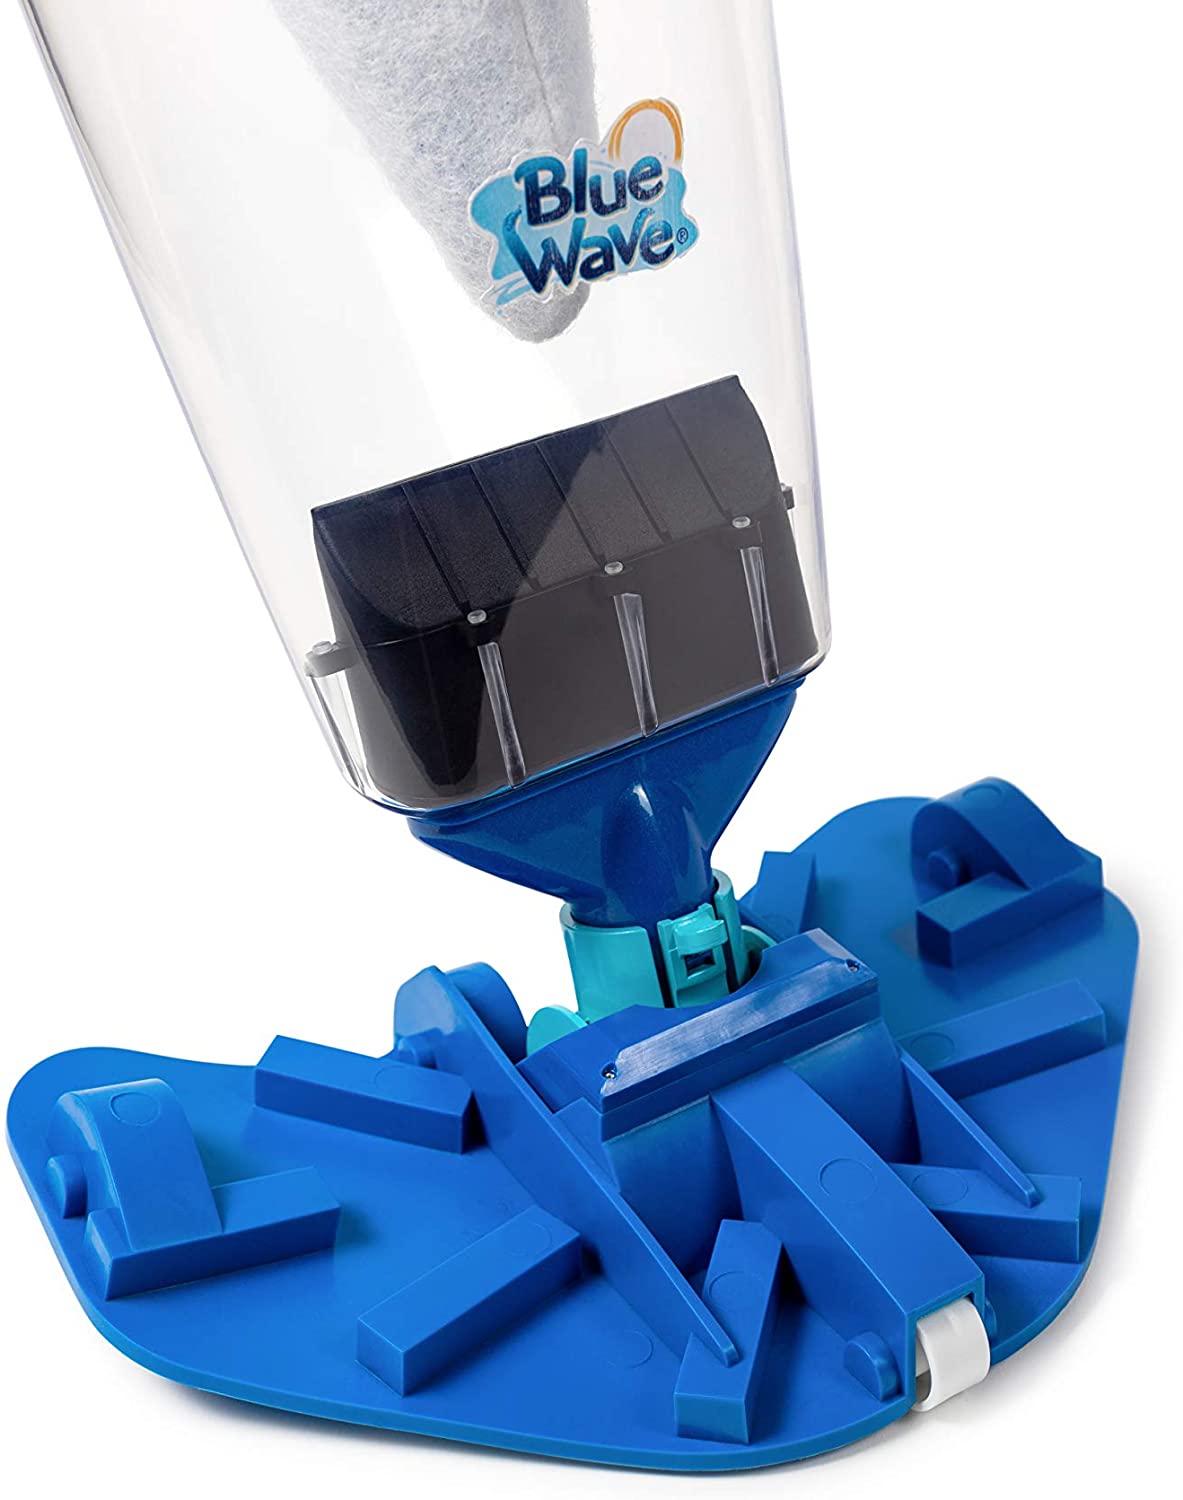 Blue Wave Bluewave Pool Blaster Fusion PV-10 Hand-Held Lithium Cleaner